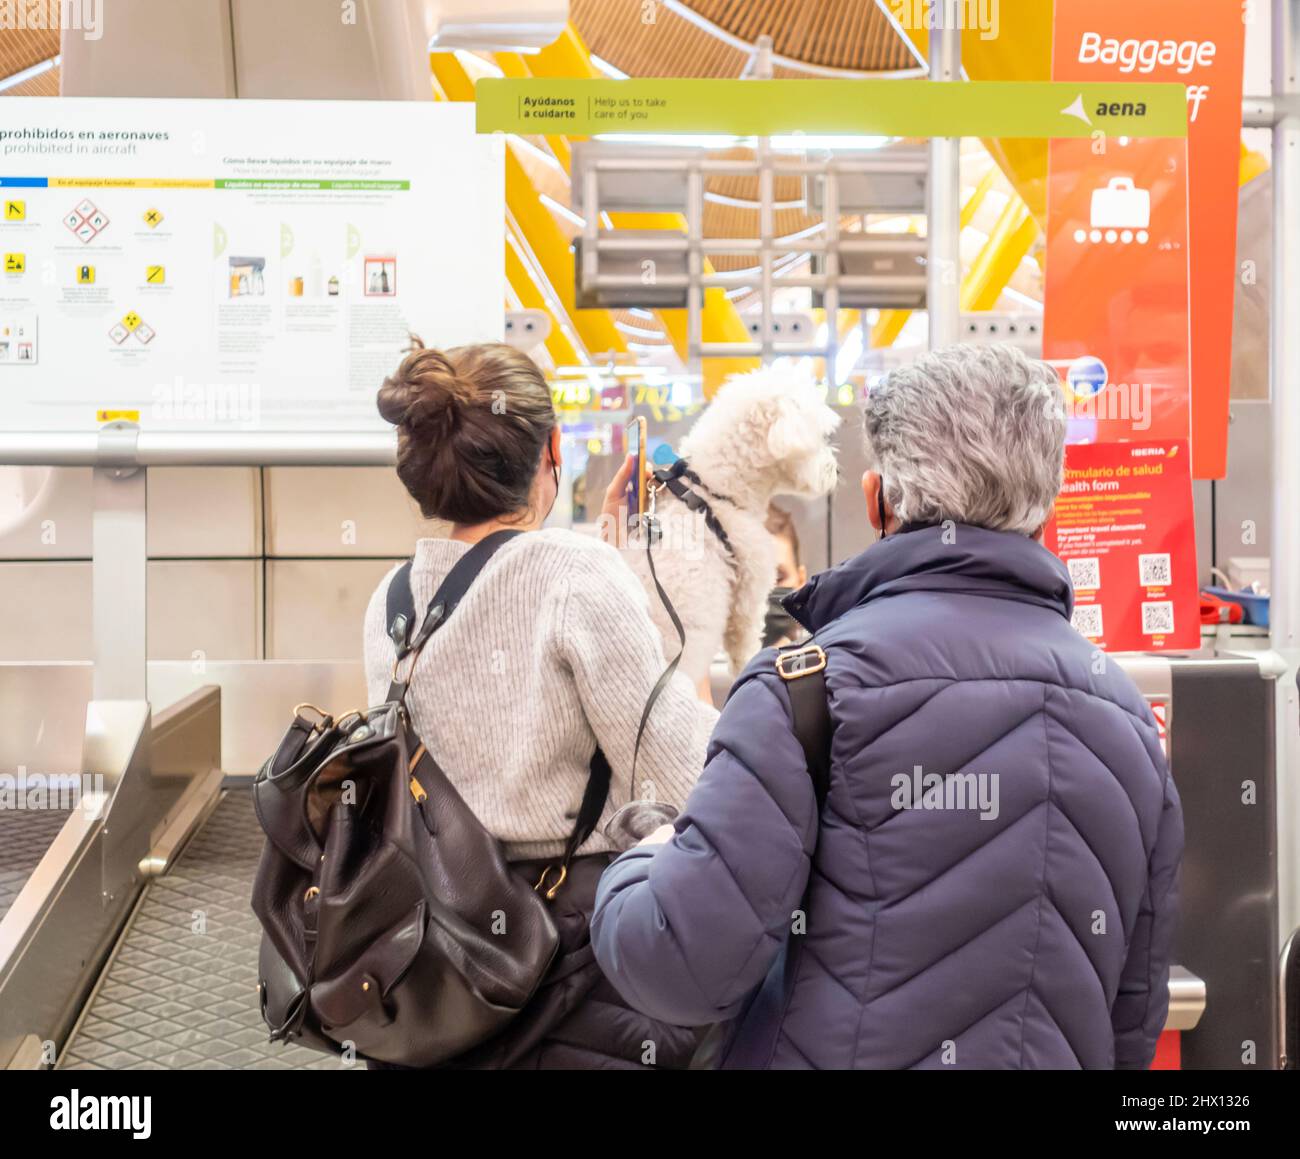 Passenger with a dog checking in at the stand, Madrid Barajas airport, MAD, Spain Stock Photo